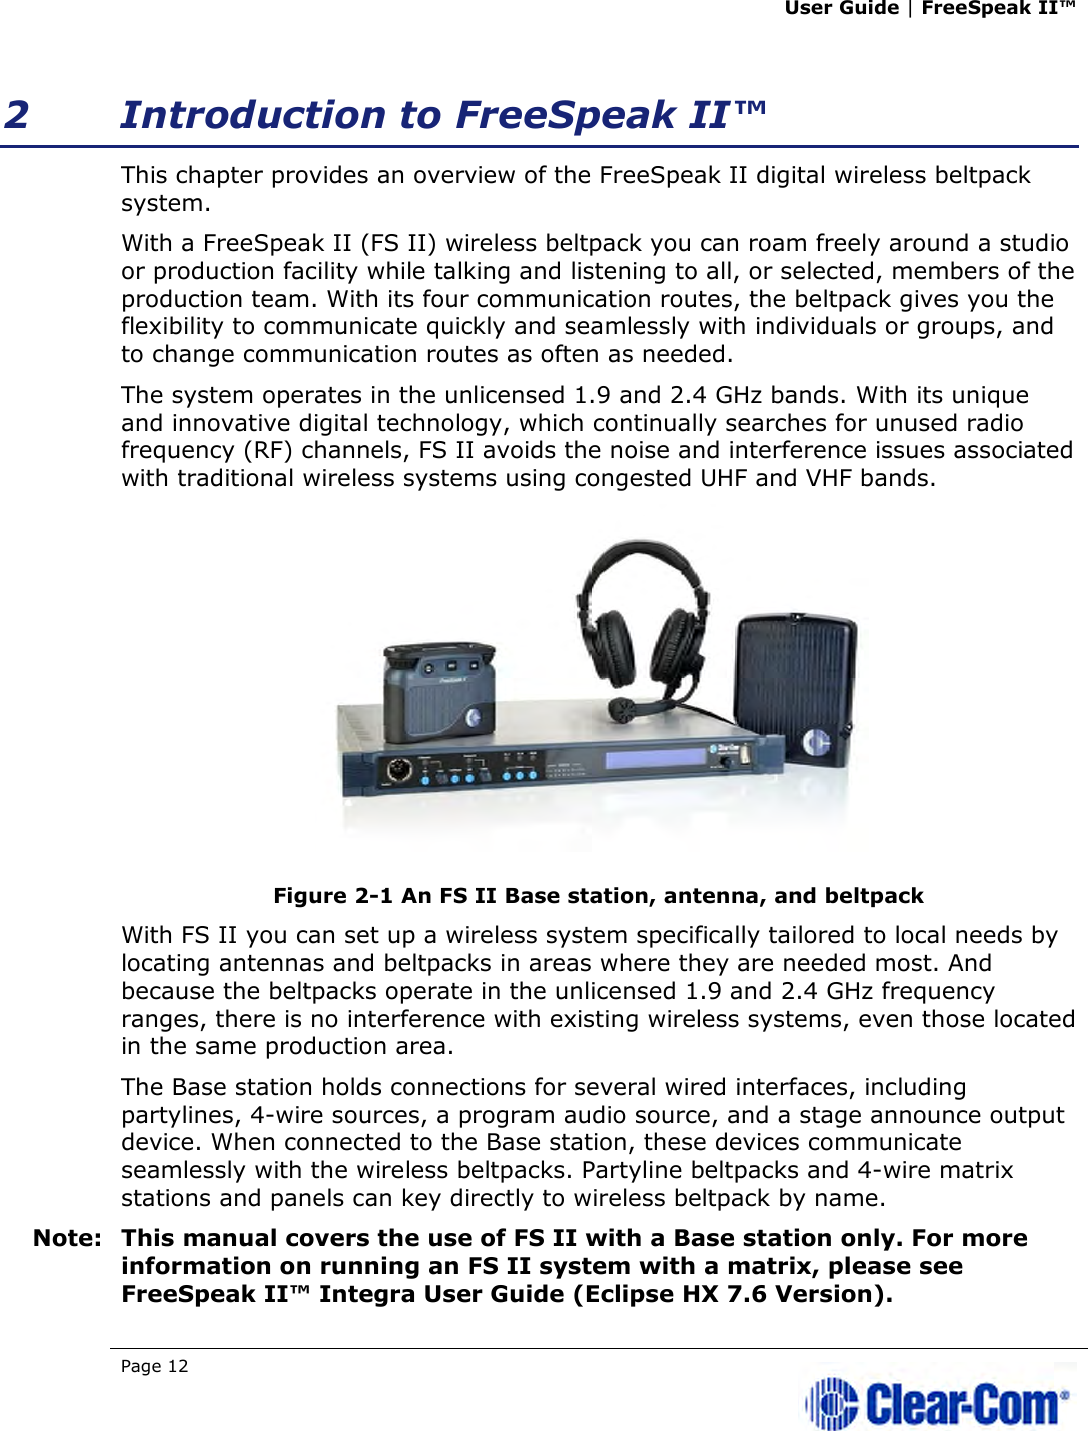 User Guide | FreeSpeak II™  Page 12   2 Introduction to FreeSpeak II™ This chapter provides an overview of the FreeSpeak II digital wireless beltpack system.  With a FreeSpeak II (FS II) wireless beltpack you can roam freely around a studio or production facility while talking and listening to all, or selected, members of the production team. With its four communication routes, the beltpack gives you the flexibility to communicate quickly and seamlessly with individuals or groups, and to change communication routes as often as needed. The system operates in the unlicensed 1.9 and 2.4 GHz bands. With its unique and innovative digital technology, which continually searches for unused radio frequency (RF) channels, FS II avoids the noise and interference issues associated with traditional wireless systems using congested UHF and VHF bands.  Figure 2-1 An FS II Base station, antenna, and beltpack With FS II you can set up a wireless system specifically tailored to local needs by locating antennas and beltpacks in areas where they are needed most. And because the beltpacks operate in the unlicensed 1.9 and 2.4 GHz frequency ranges, there is no interference with existing wireless systems, even those located in the same production area.  The Base station holds connections for several wired interfaces, including partylines, 4-wire sources, a program audio source, and a stage announce output device. When connected to the Base station, these devices communicate seamlessly with the wireless beltpacks. Partyline beltpacks and 4-wire matrix stations and panels can key directly to wireless beltpack by name.  Note: This manual covers the use of FS II with a Base station only. For more information on running an FS II system with a matrix, please see FreeSpeak II™ Integra User Guide (Eclipse HX 7.6 Version). 